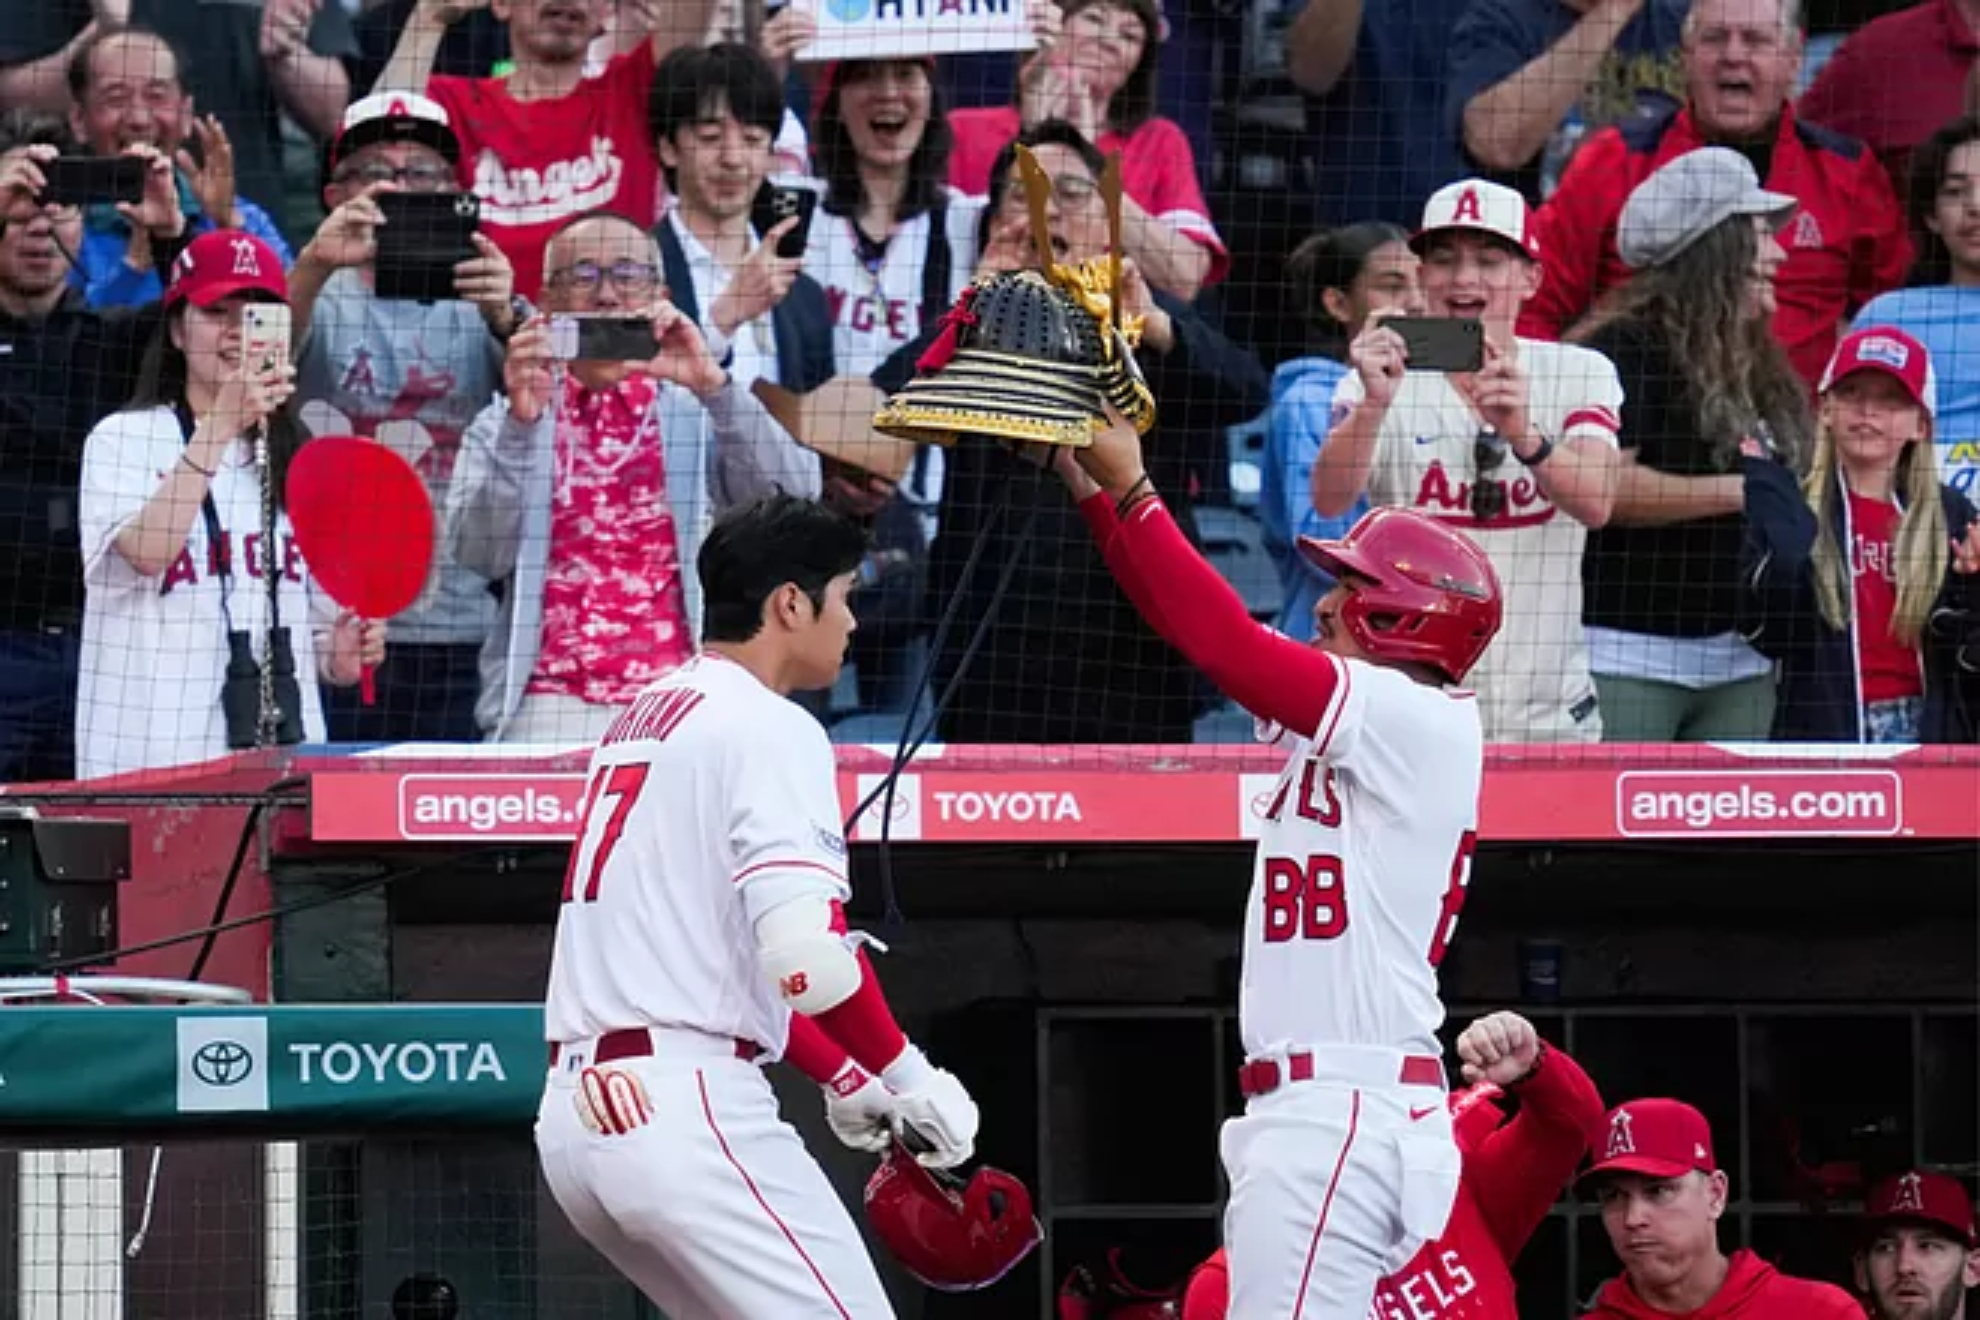 Shohei Ohtani and his incredible feat that brings him closer to a 600 million dollar mega-deal